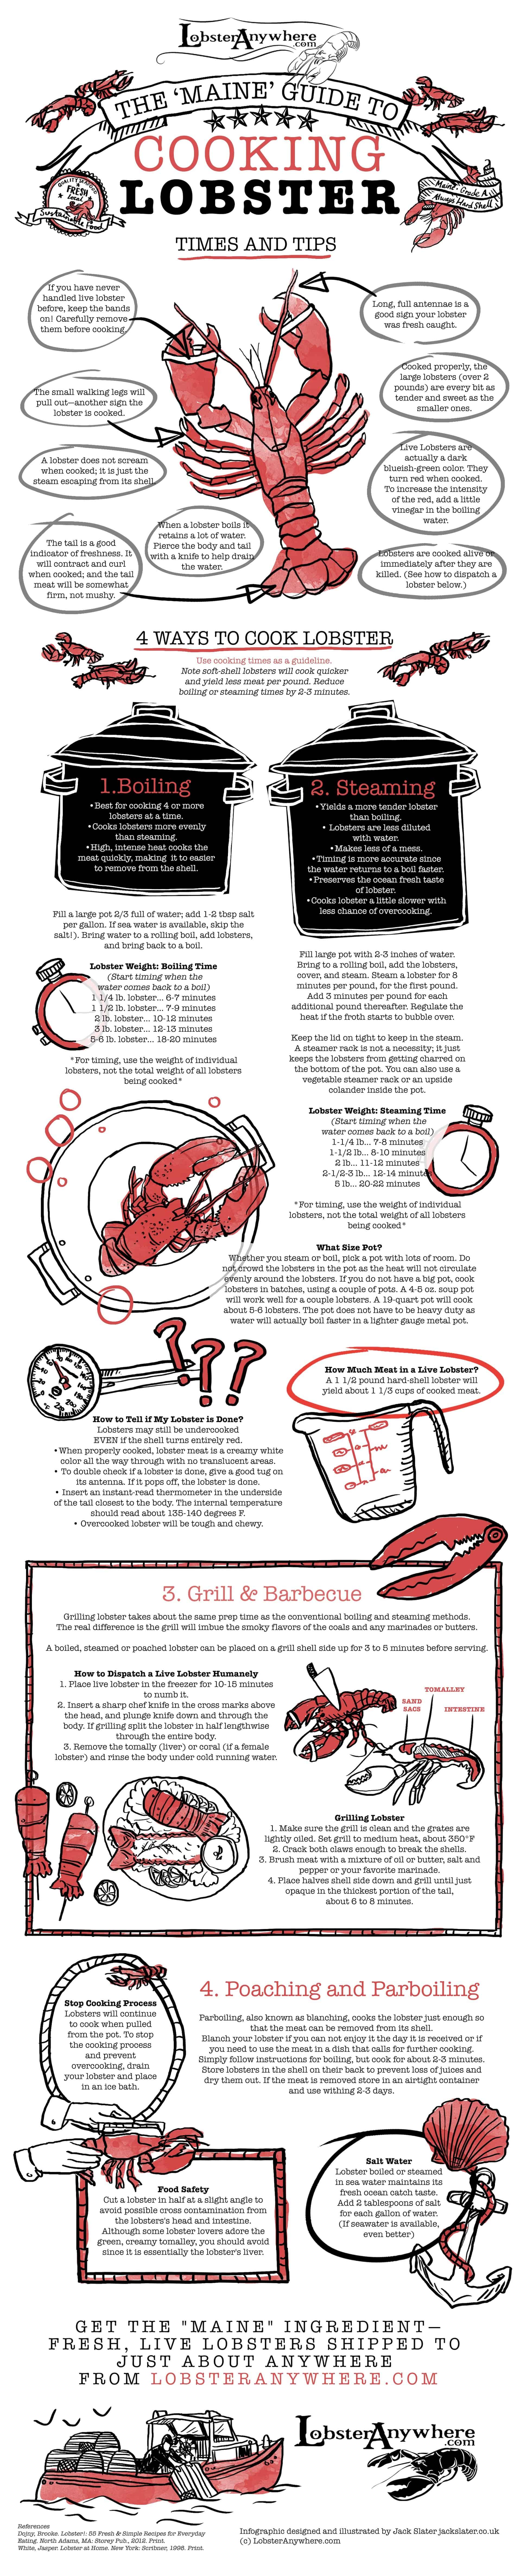 The Ultimate guide to lobster cooking Times and Tips